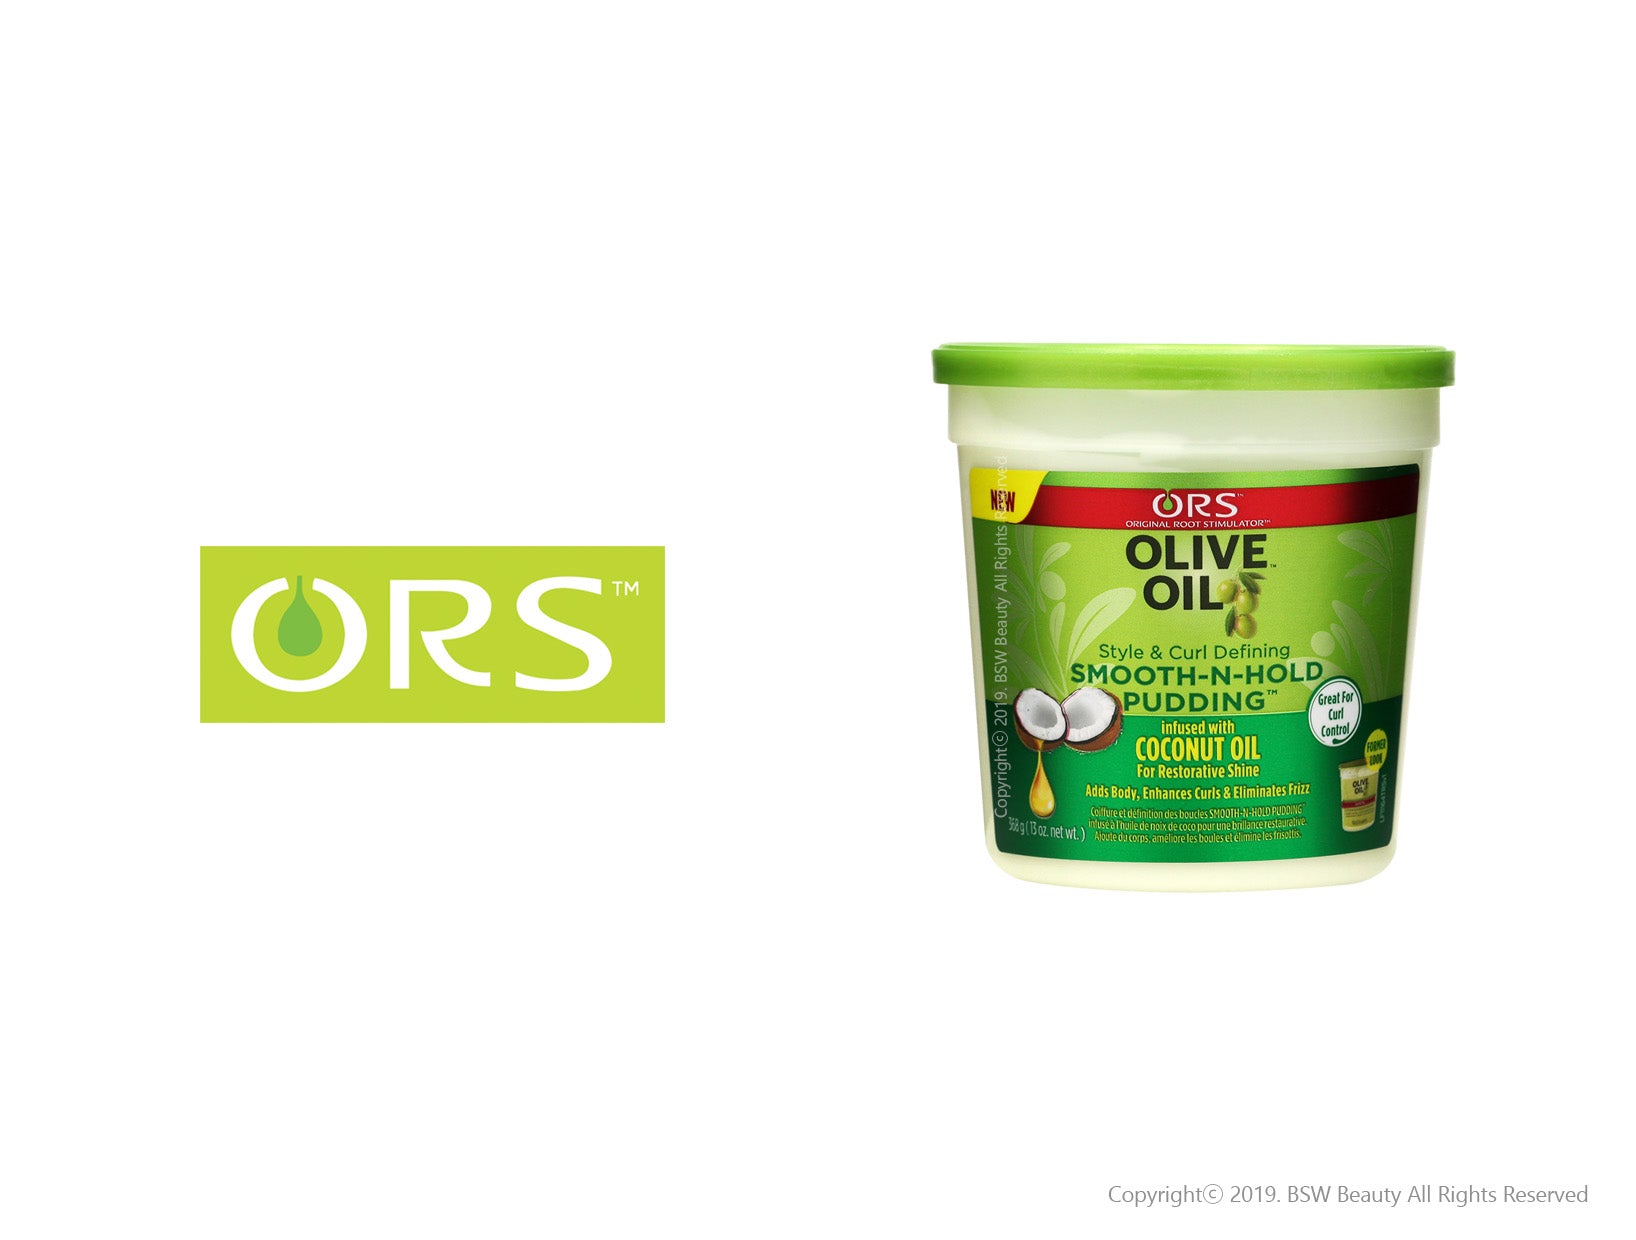 ORS OLIVE OIL STYLE & CURL DEFINING SMOOTH-N-HOLD PUDDING 13oz